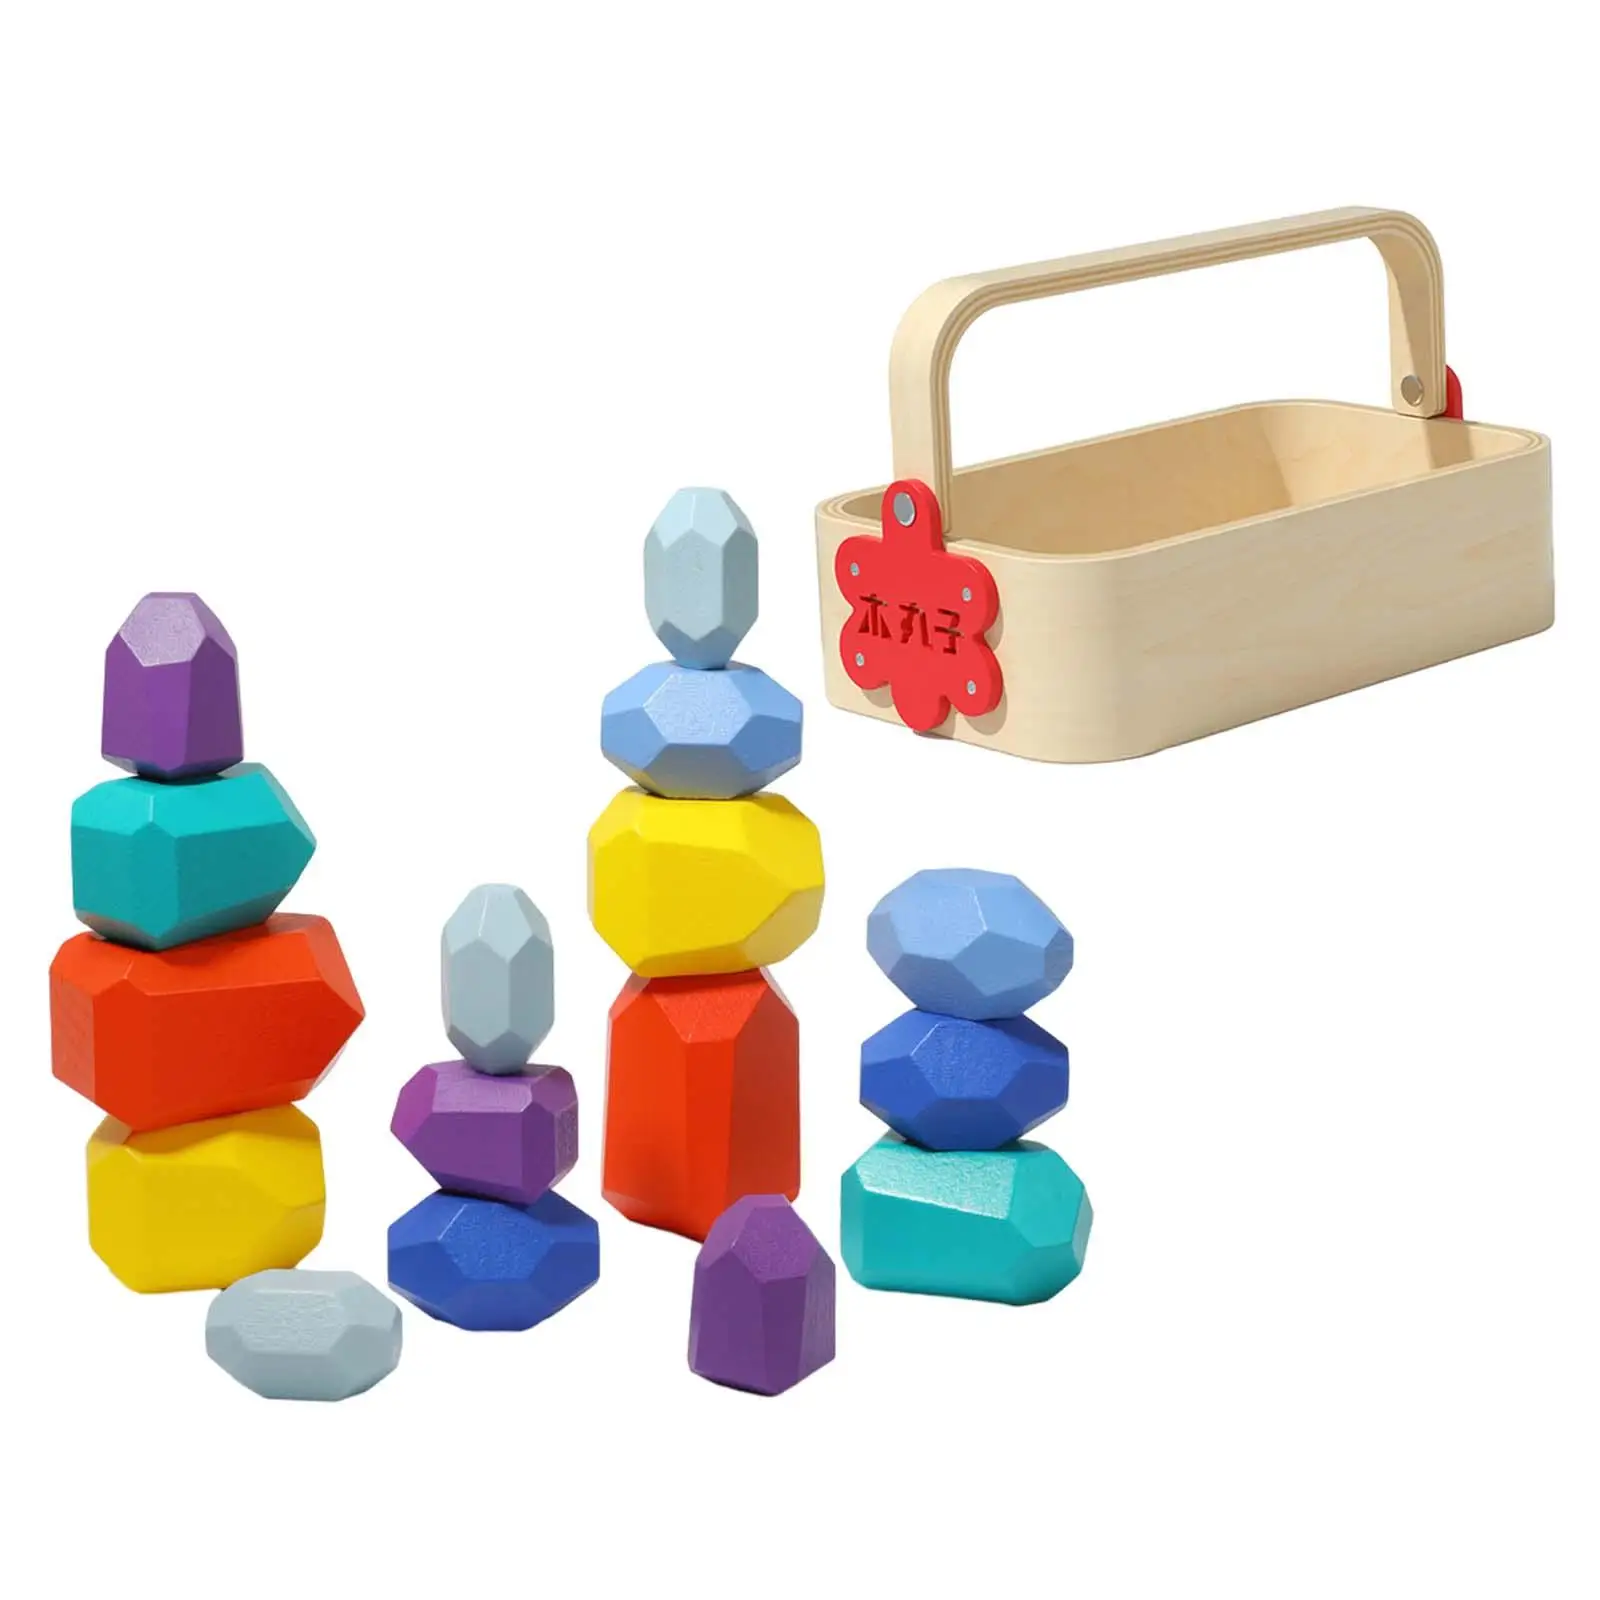 Stacking Stones Colorful Stacked Stone Puzzle Toys with Basket Promotes Creativity Colorful Building Blocks Holiday Gifts